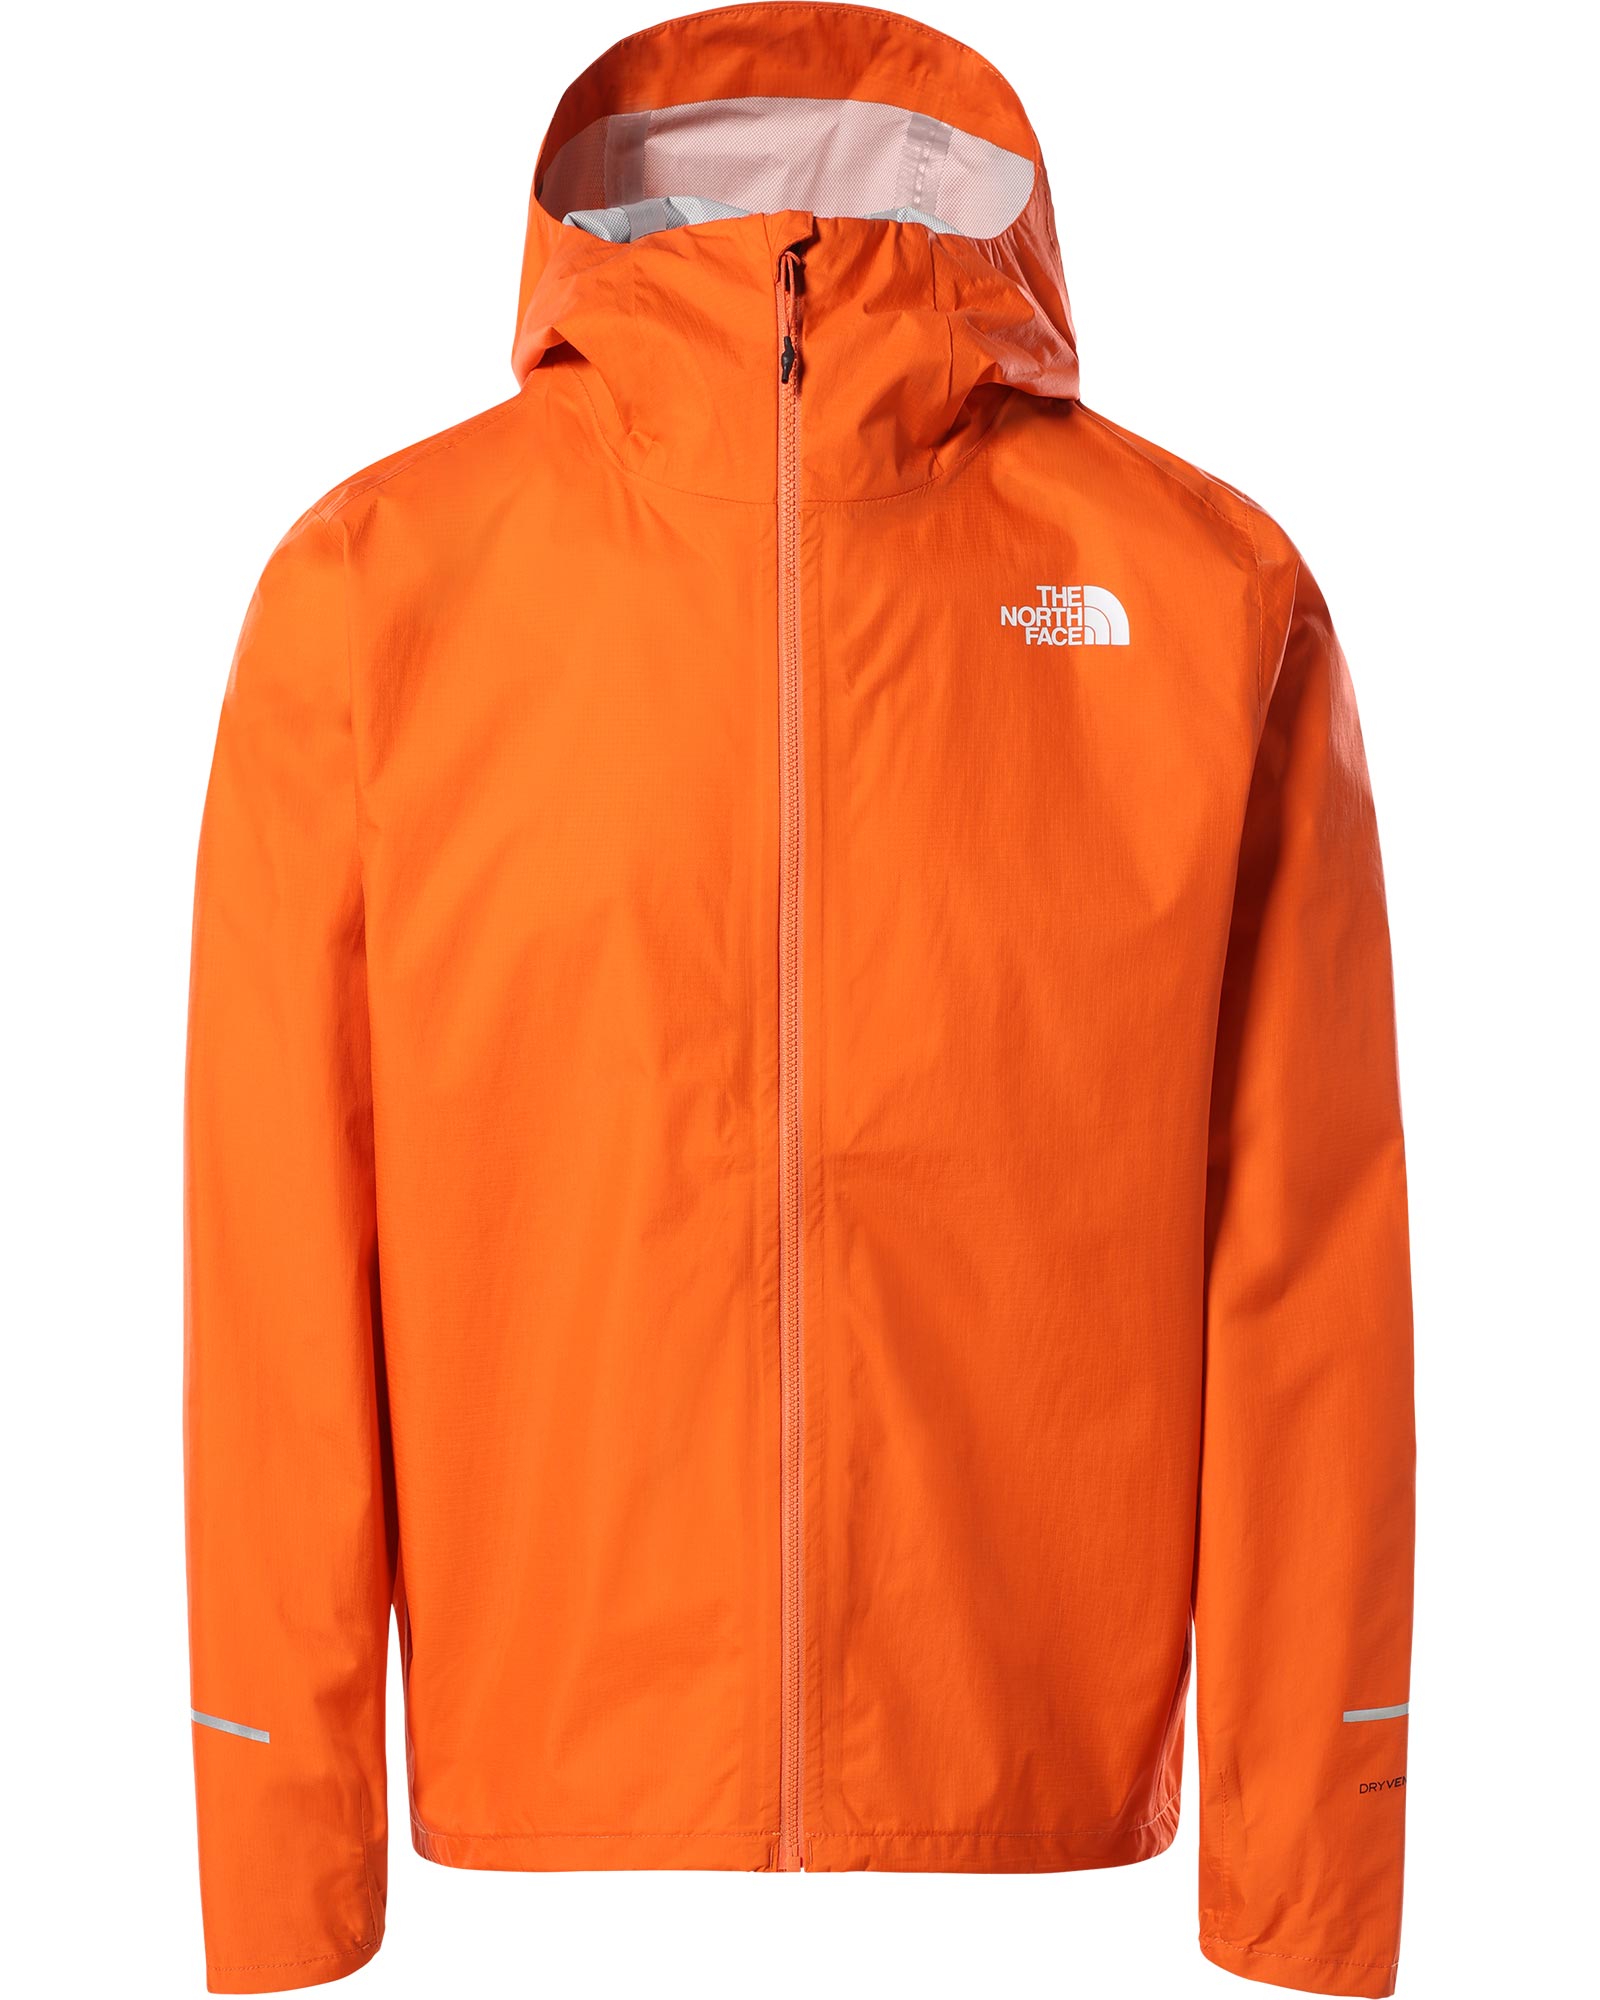 The North Face First Dawn Men’s Packable Jacket - Flame S